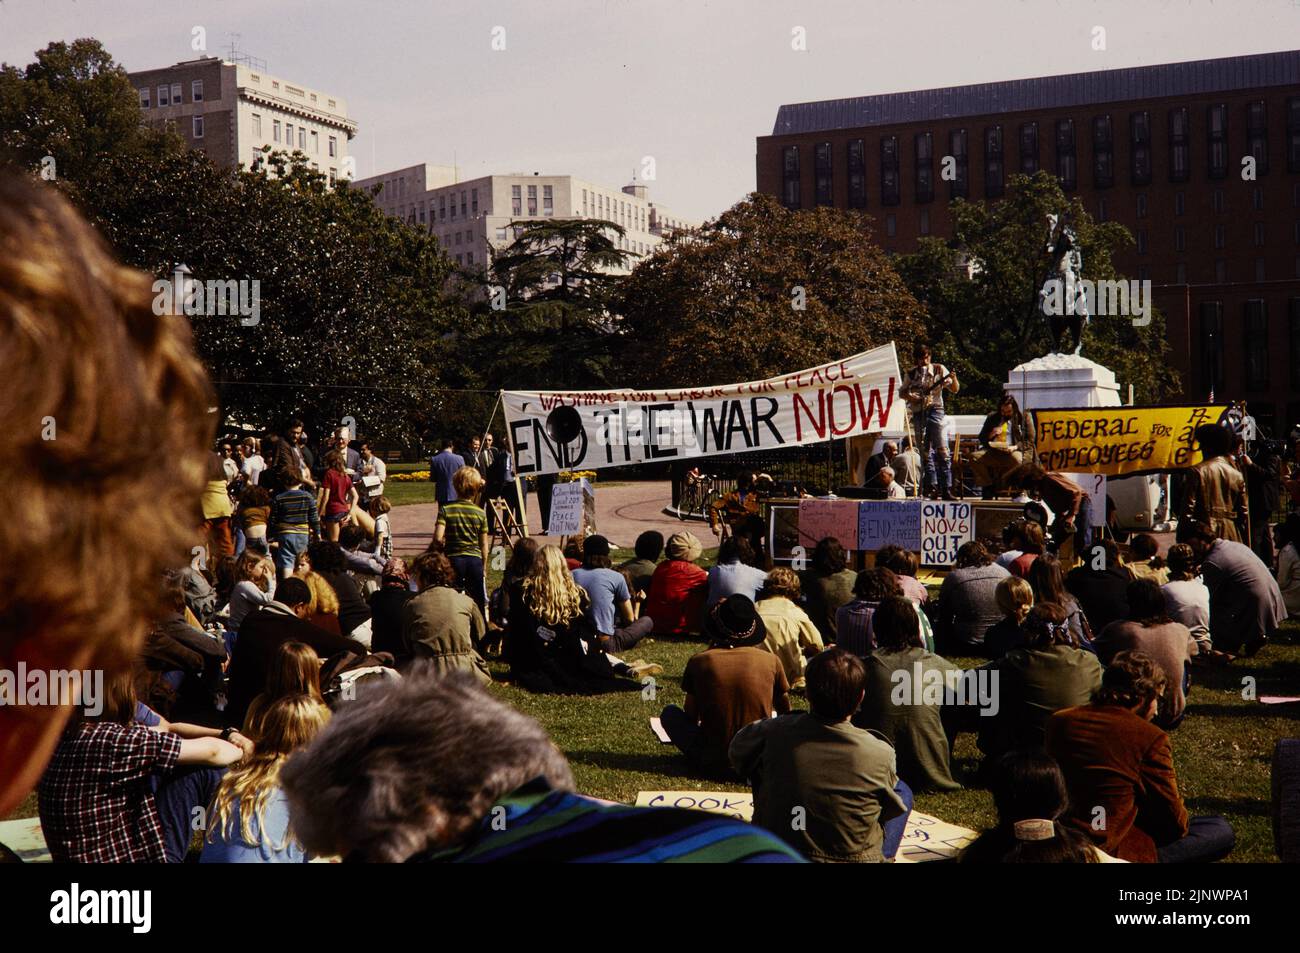 Demonstrations. Anti-war protest in Washington DC. Stock Photo